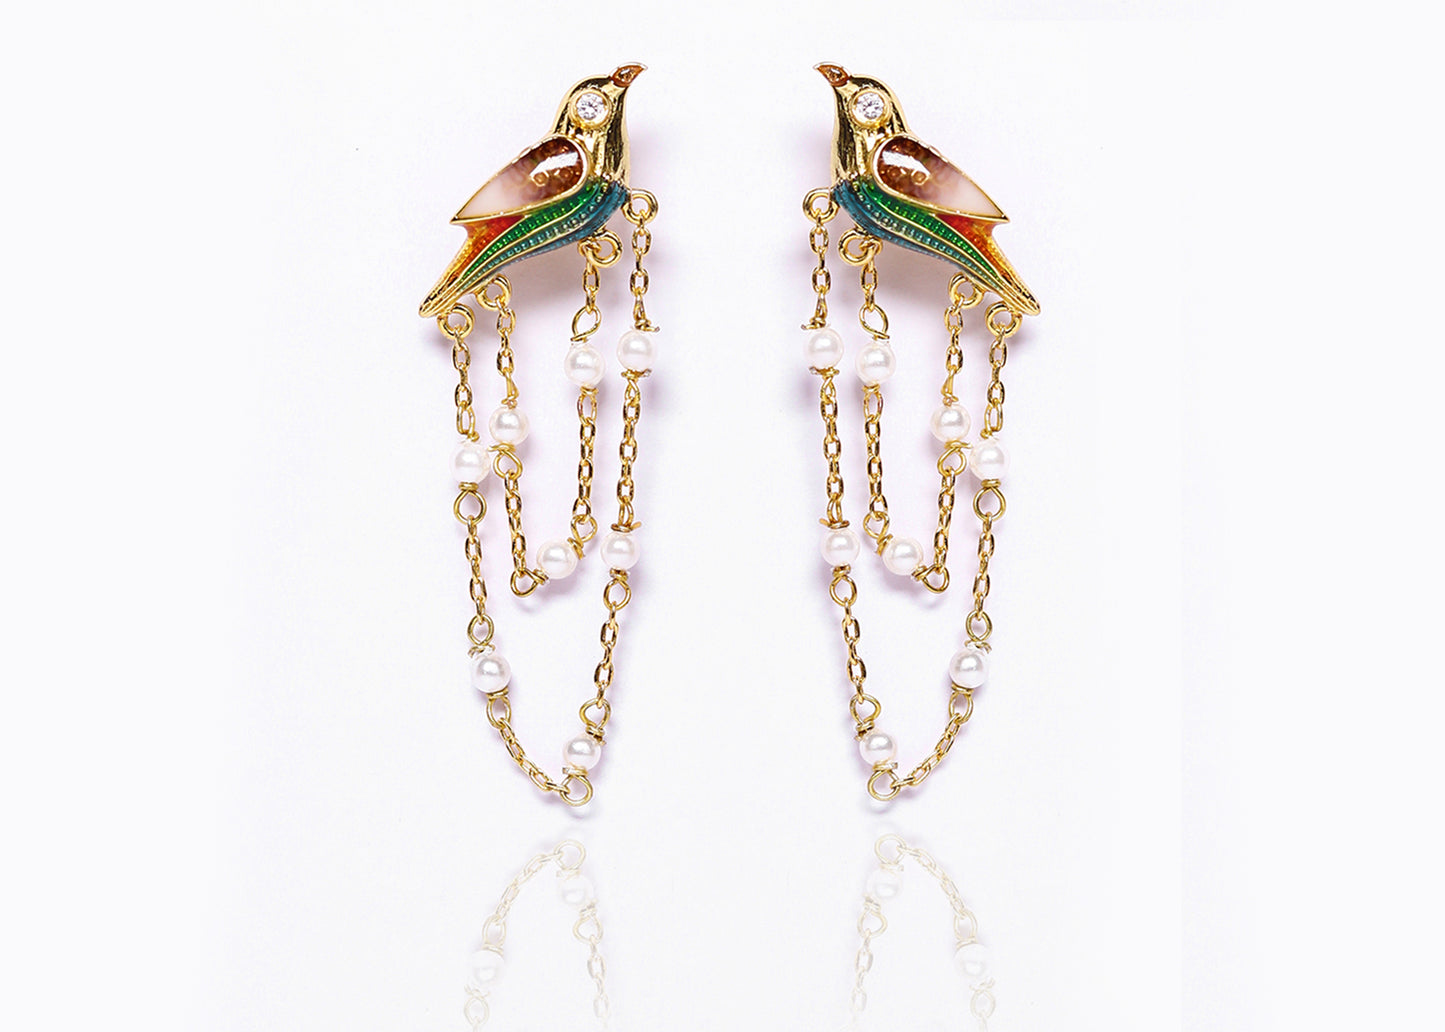 The Chirpy Vibes Earrings